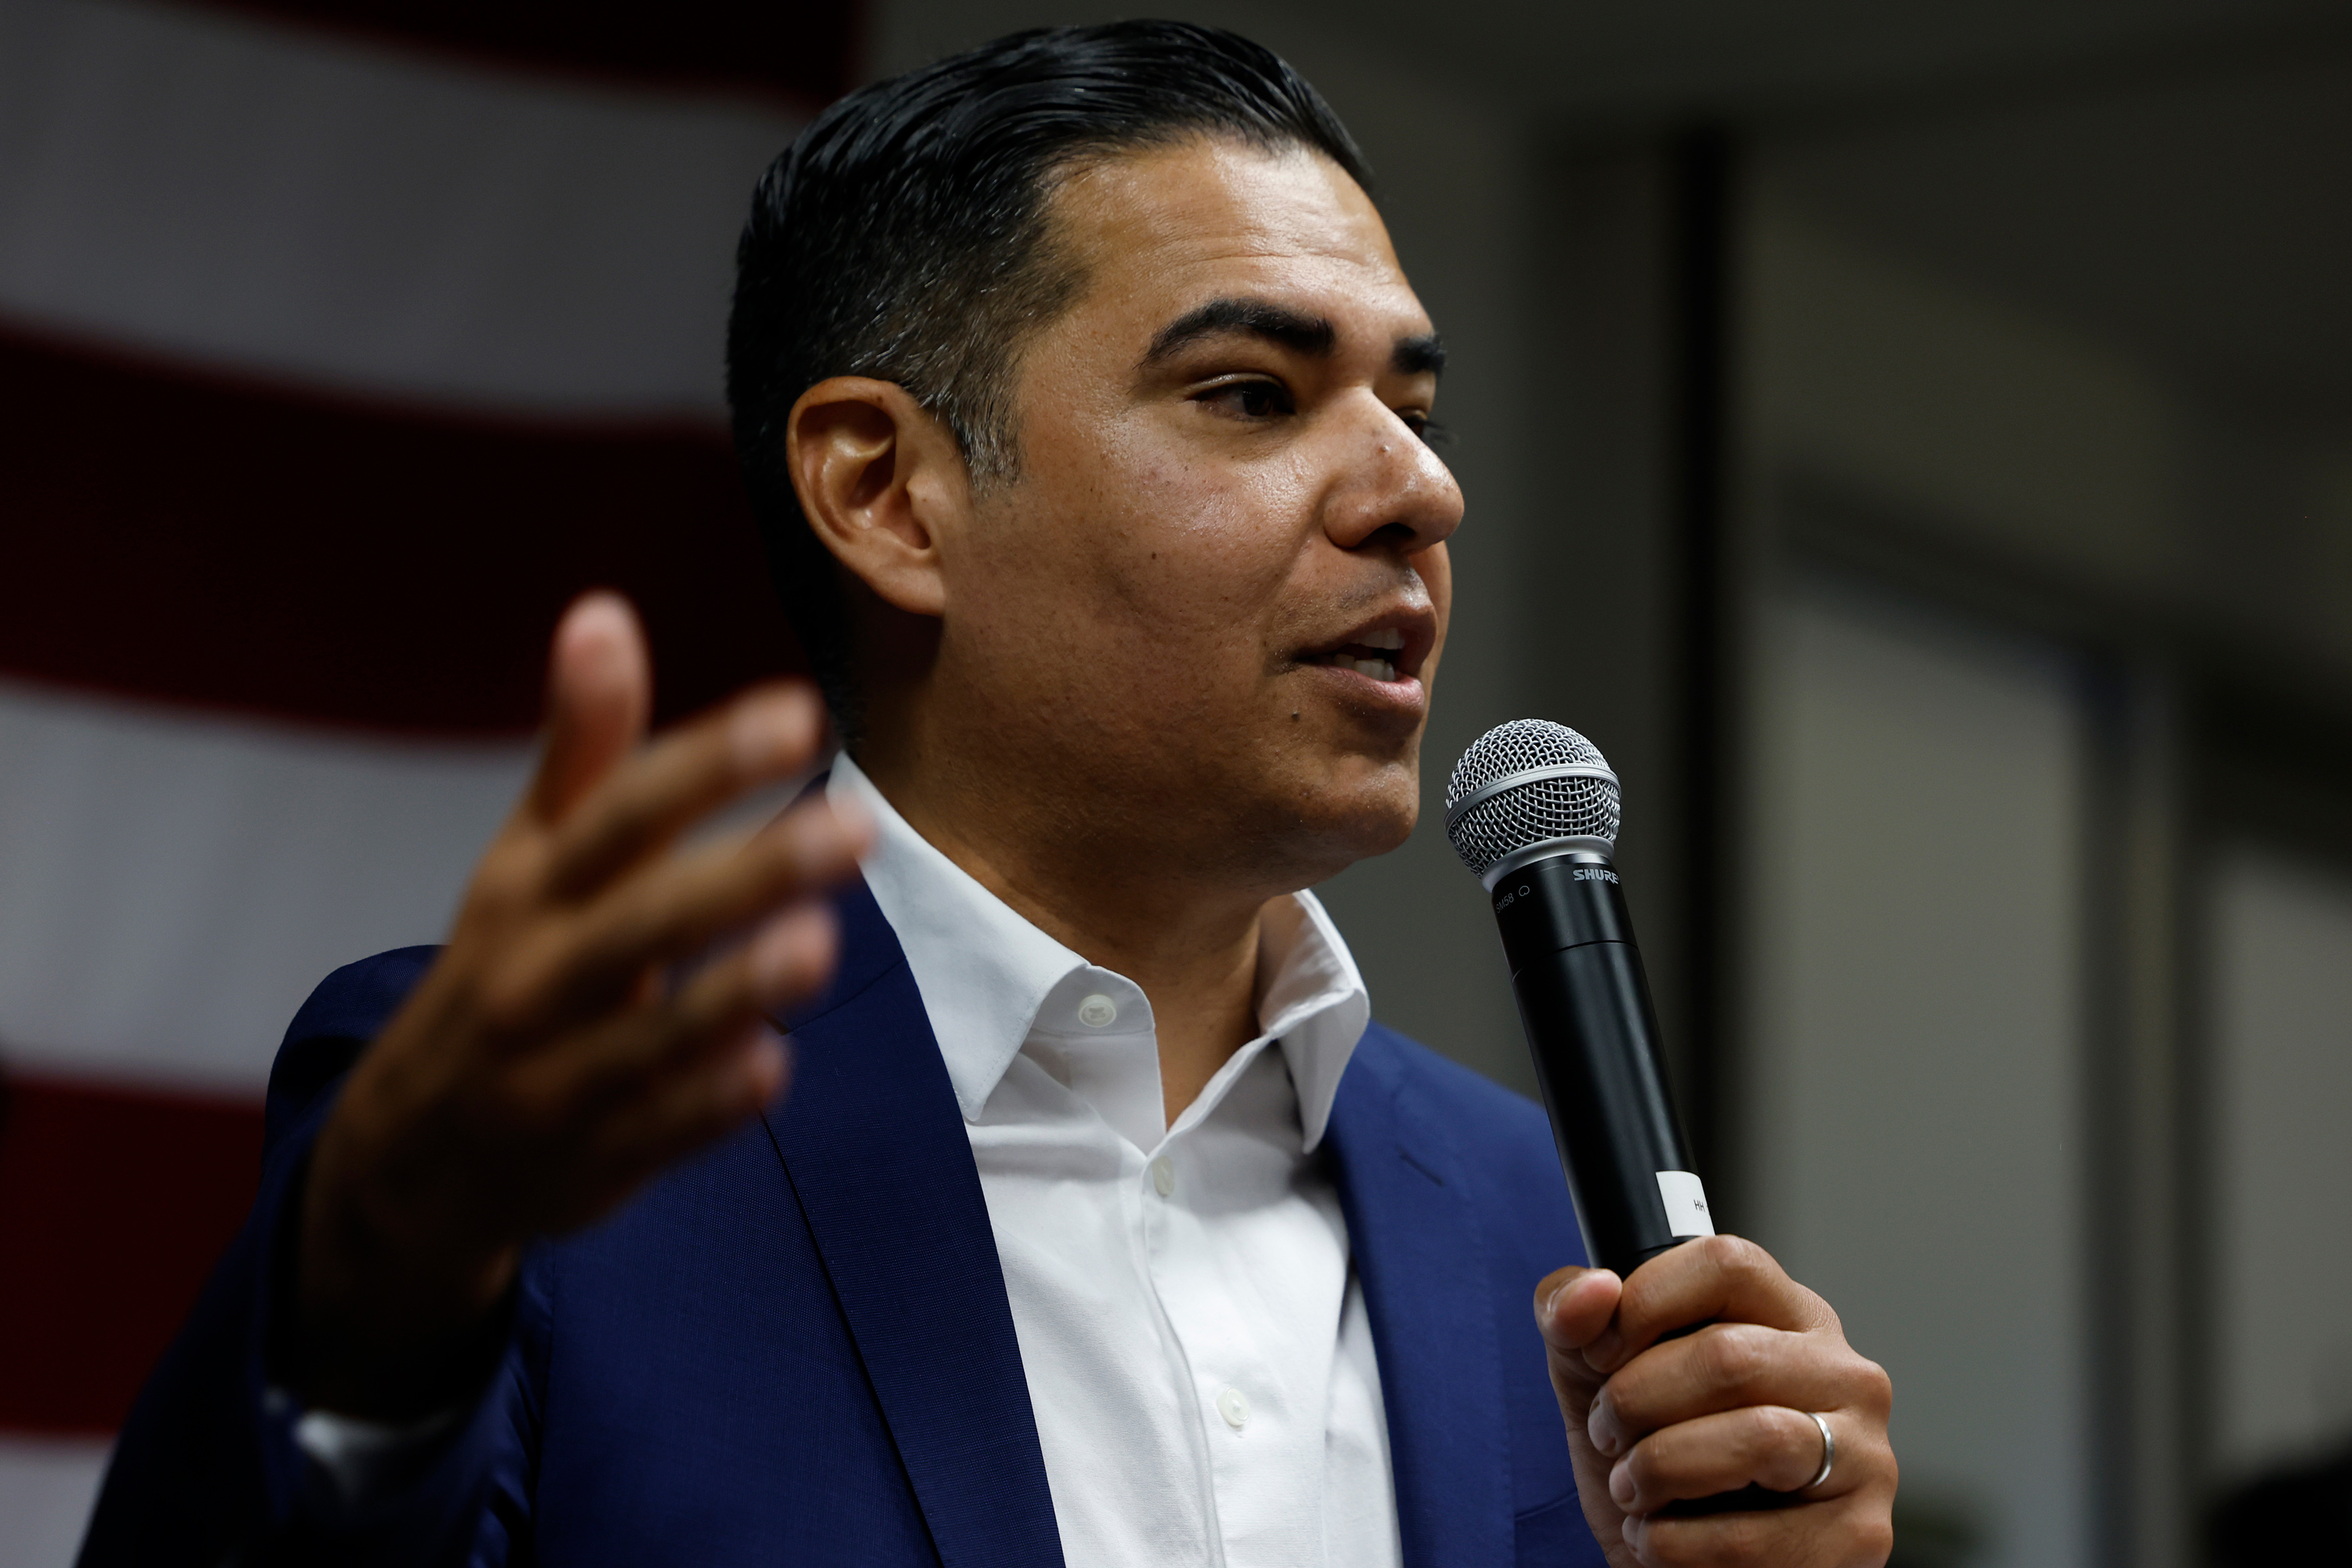 Robert Garcia speaks at a Congressional Hispanic Caucus event welcoming new Latino members to Congress at the headquarters of the Democratic National Committee in Washington, DC on November 18, 2022.